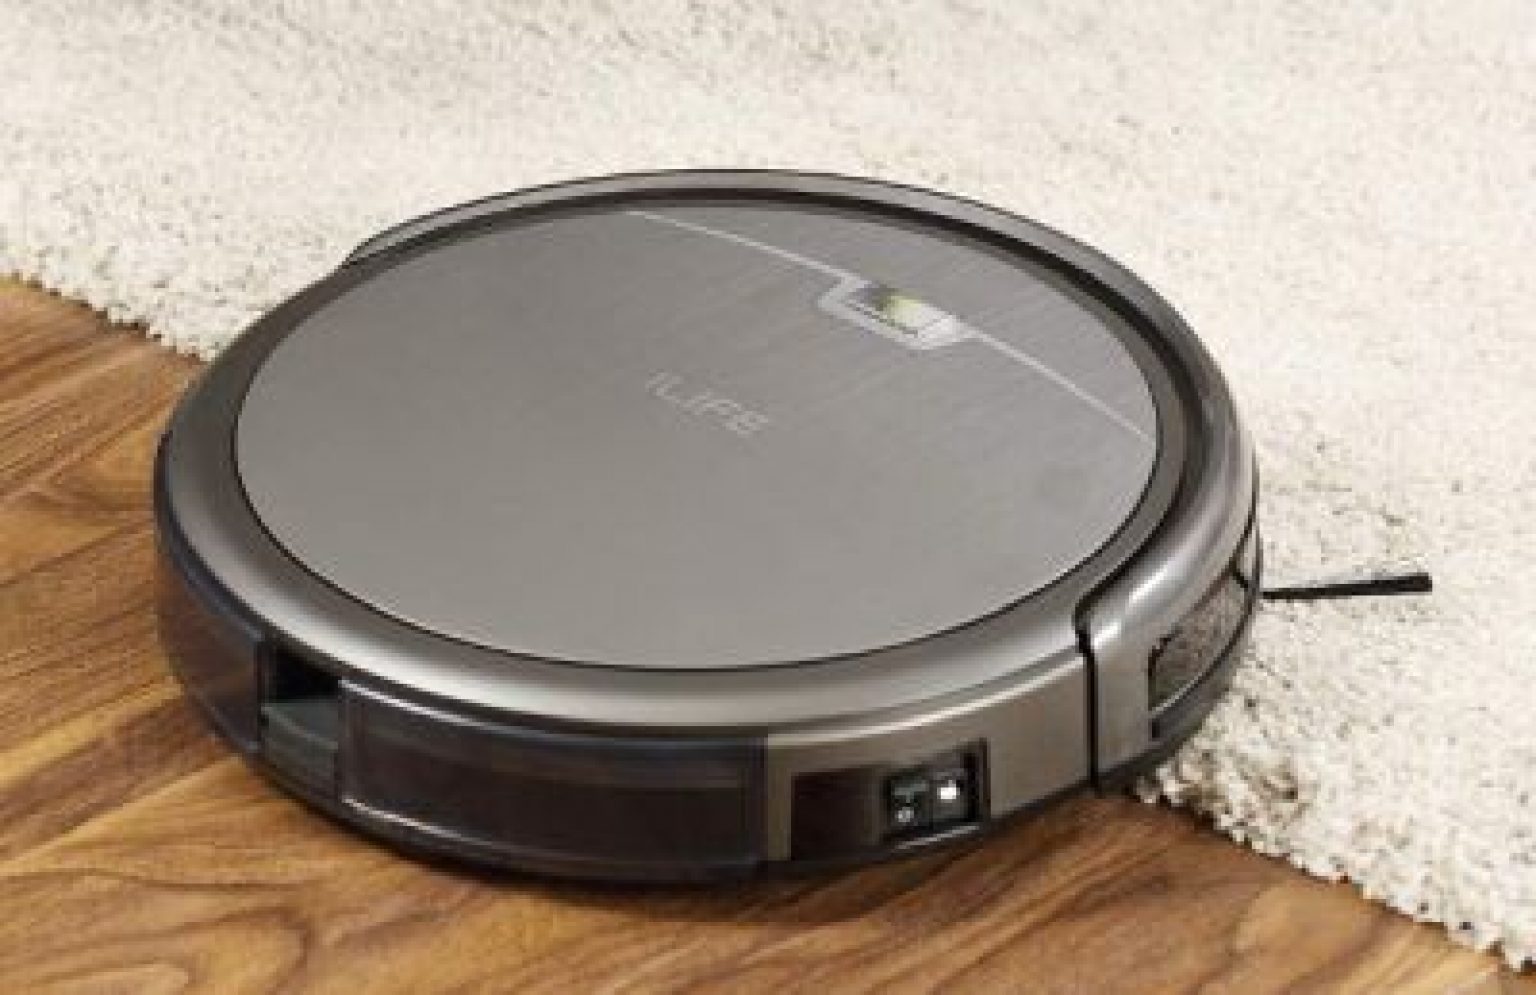 Top 9 Best Highest Rated Robotic Vacuums In 2022